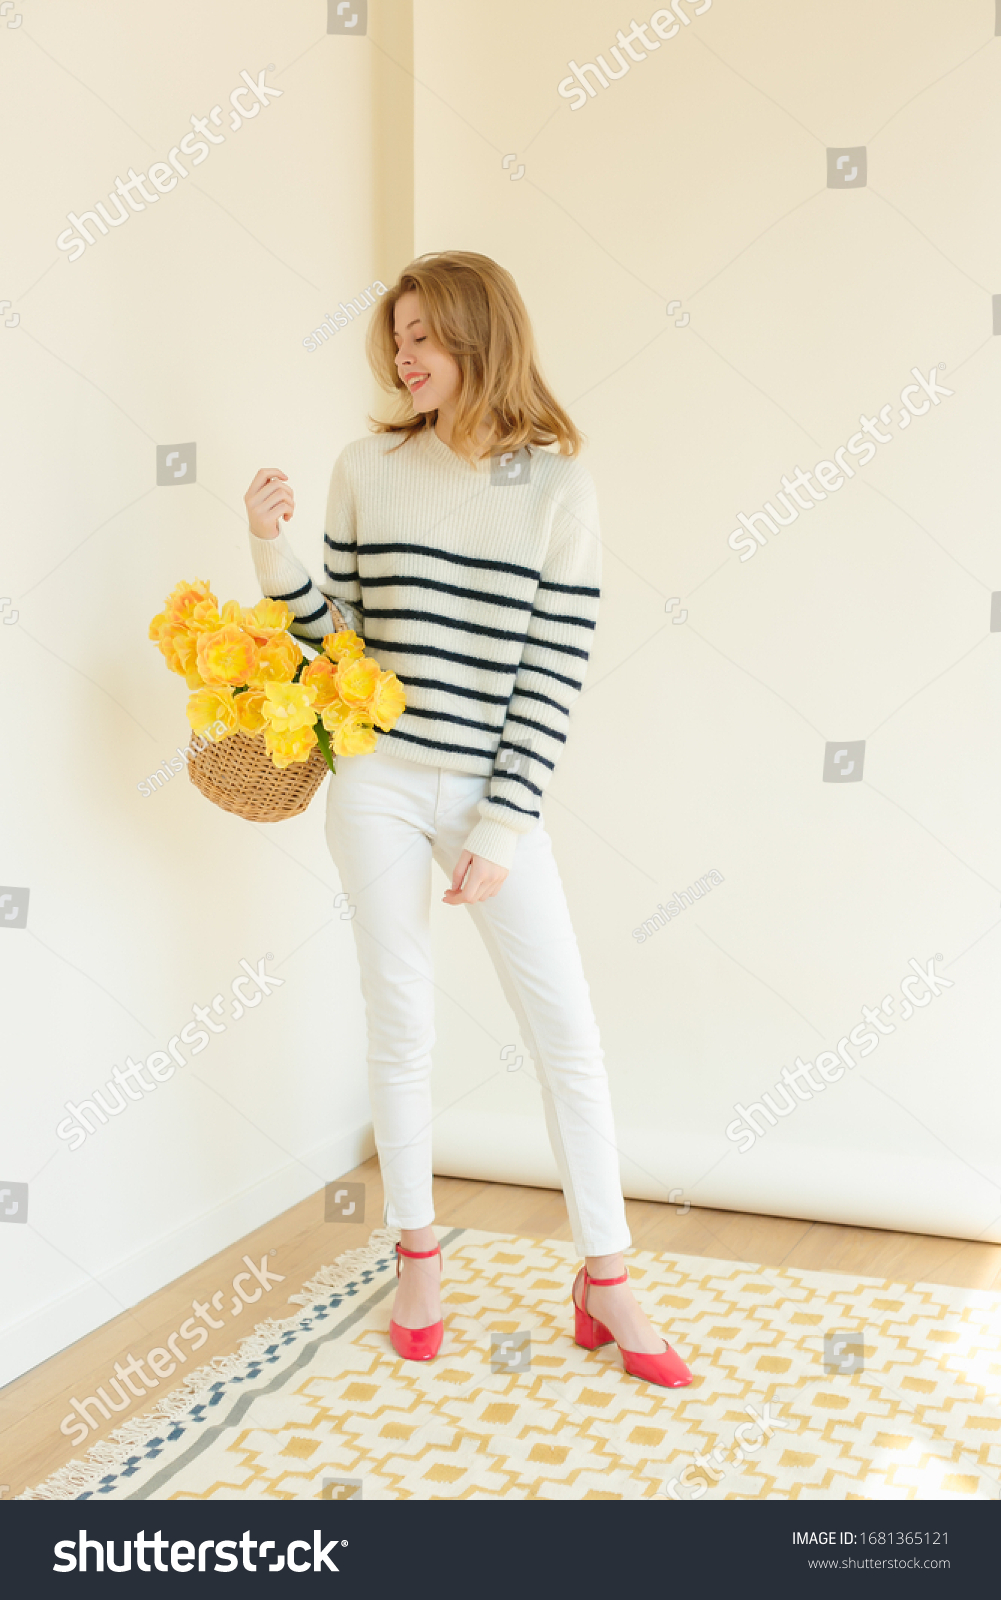 Shoot fashion campaign story. Charming model staying, wearing white textile sweater with stripes and creamy pants. Girl holding bunch of tulips flowers. Colorful carpet on floor. White Background.  #1681365121